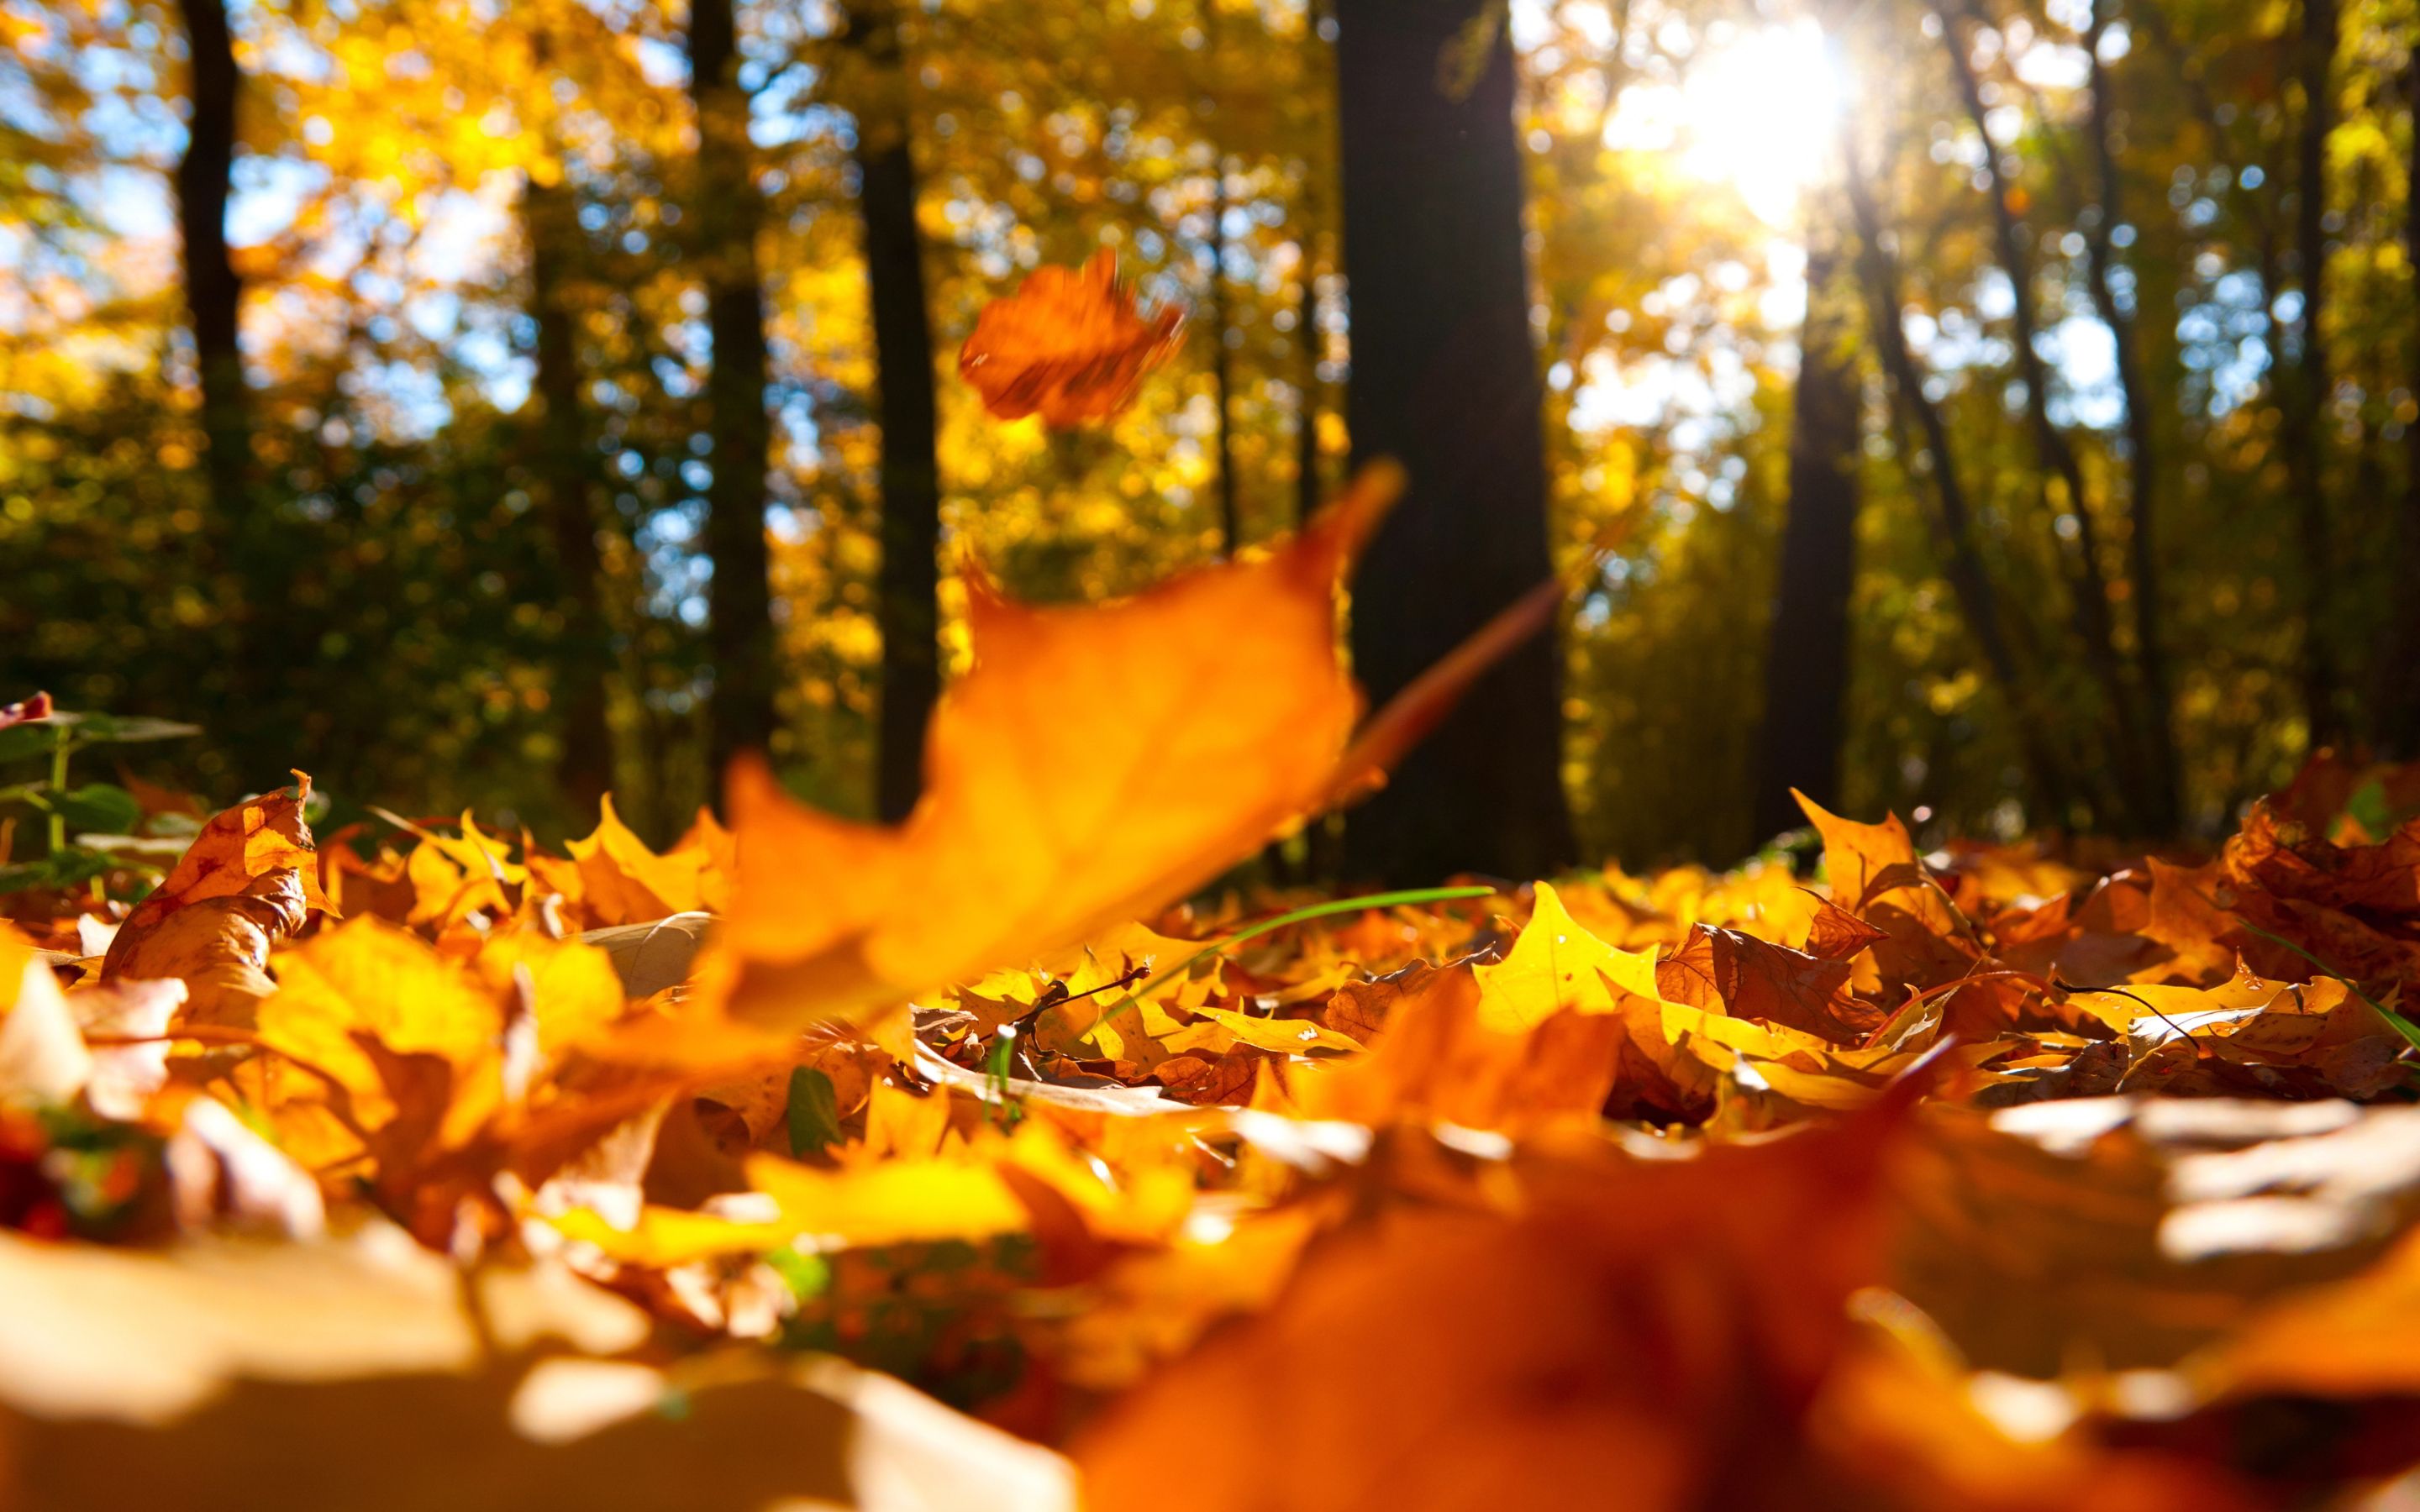 HD wallpaper, Autumn, Leaves, Ground, Falling